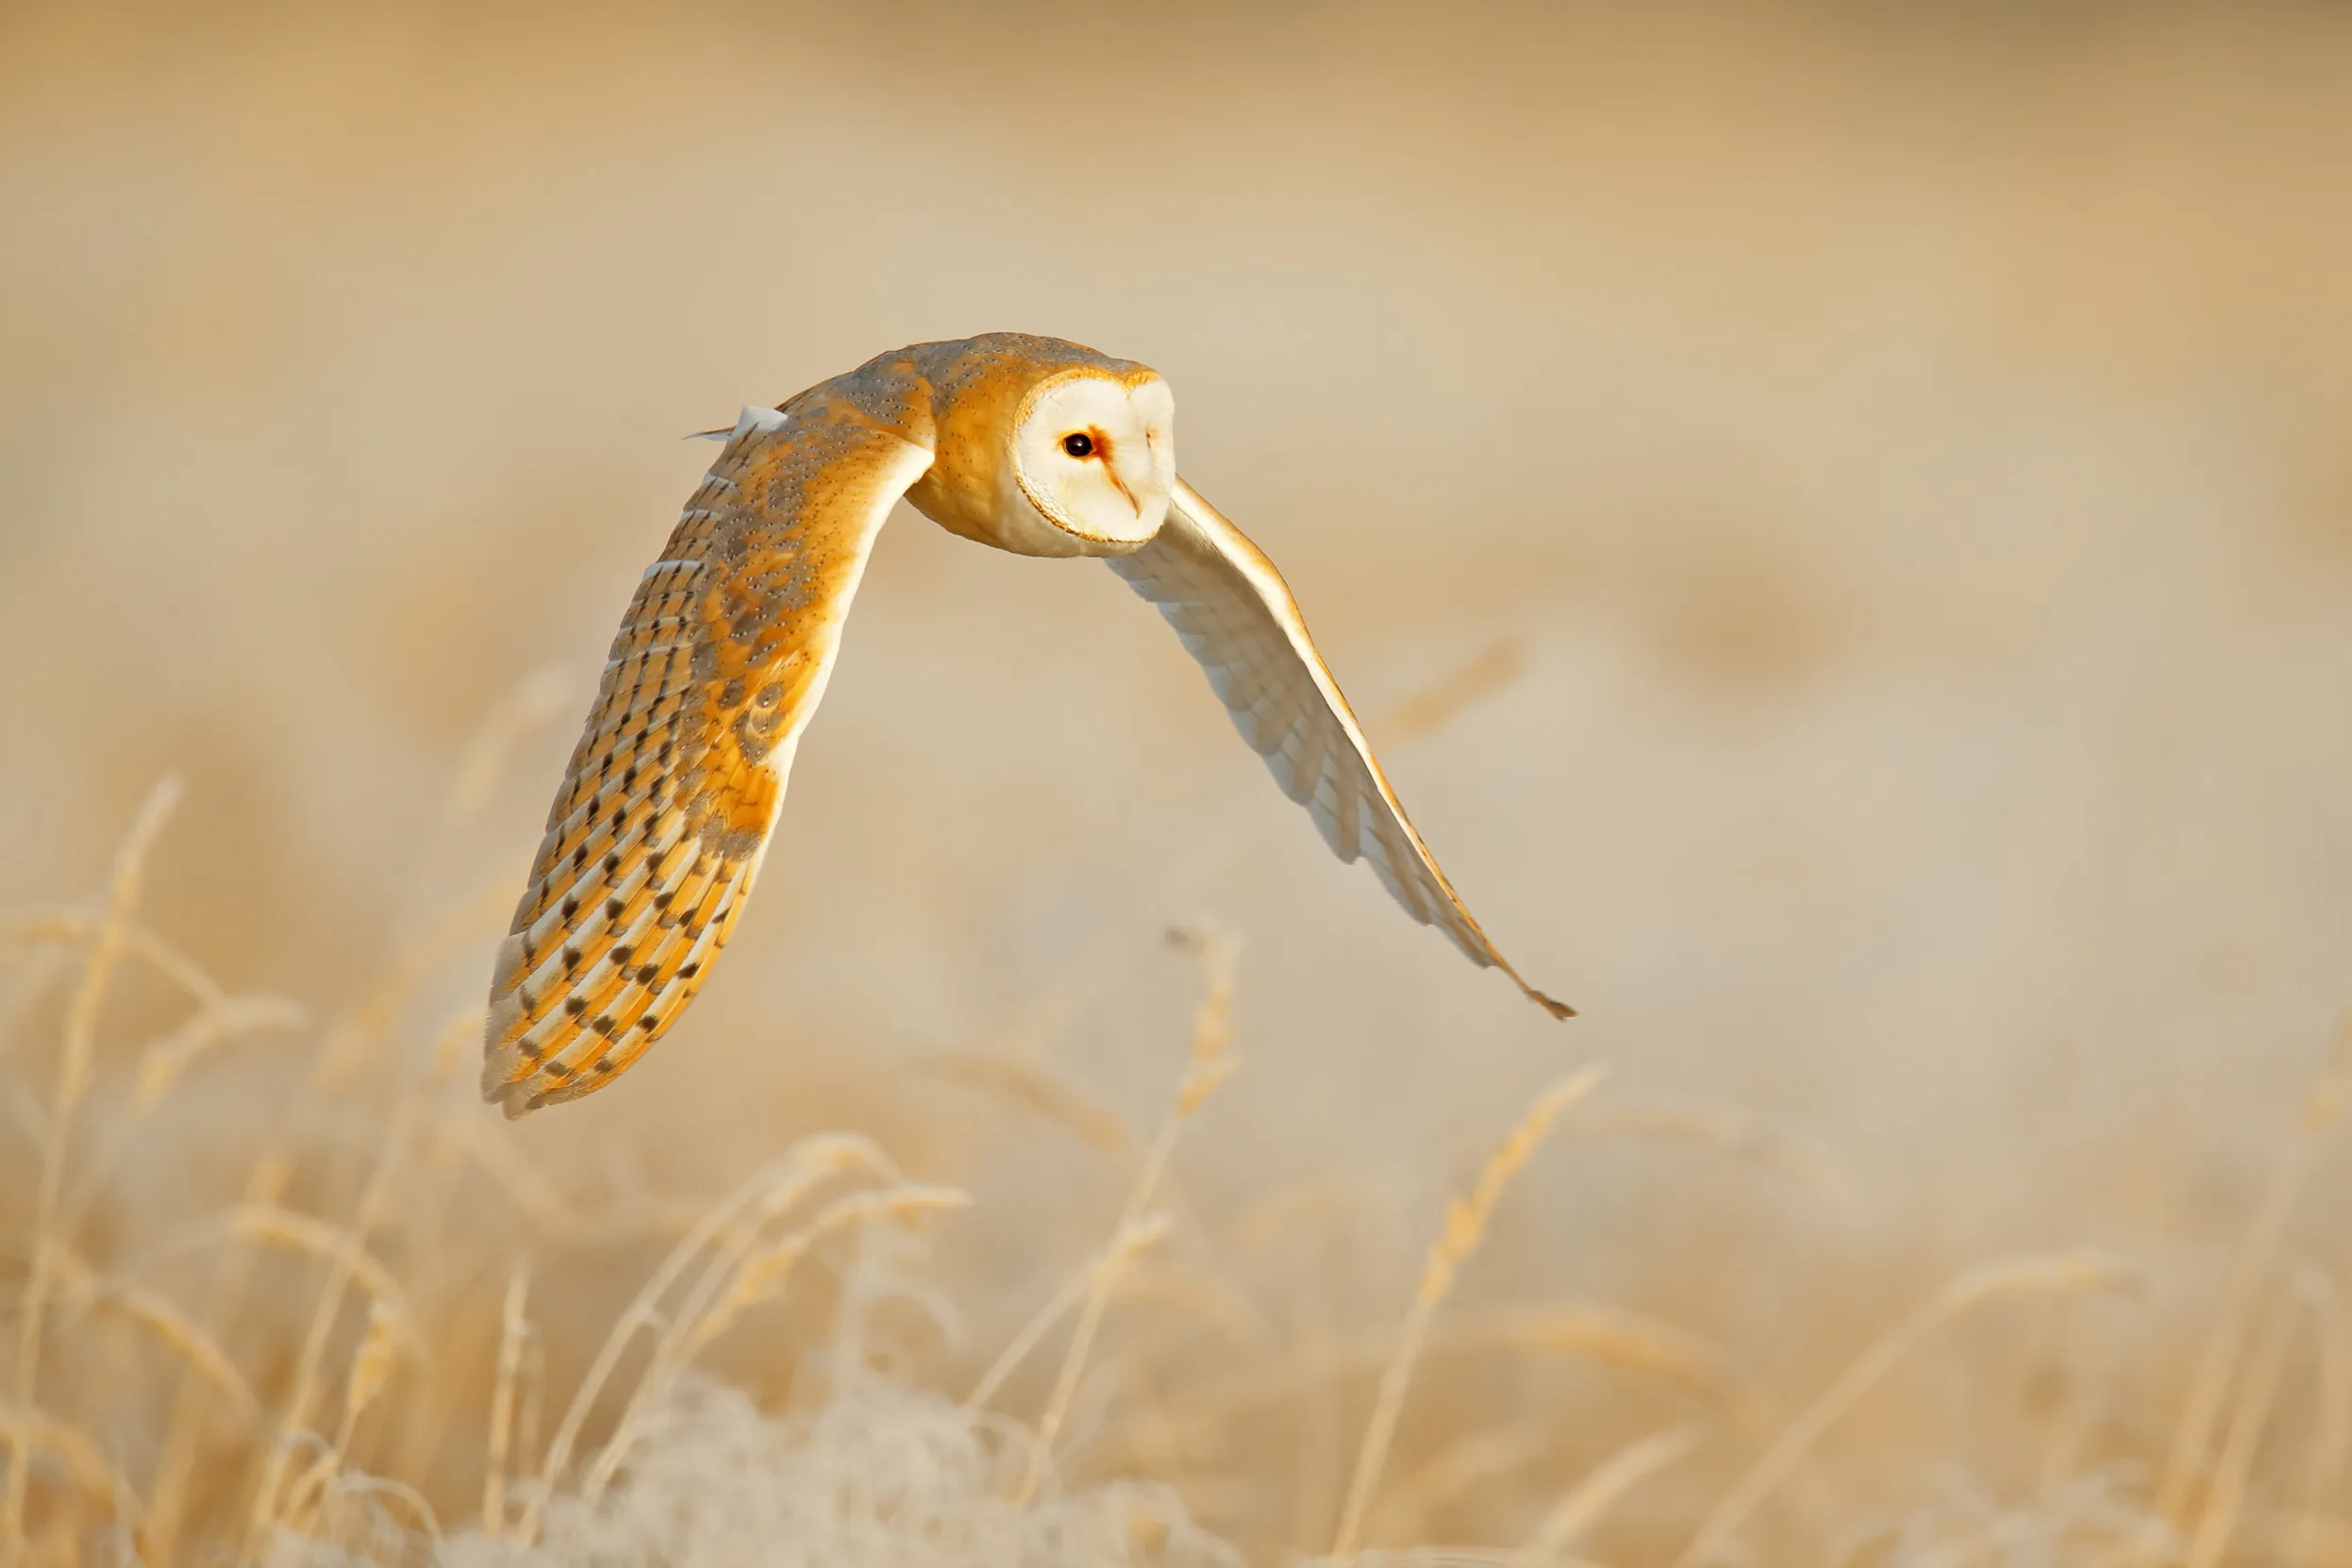 Barn Owl in flight above the rime white grass in the morning.